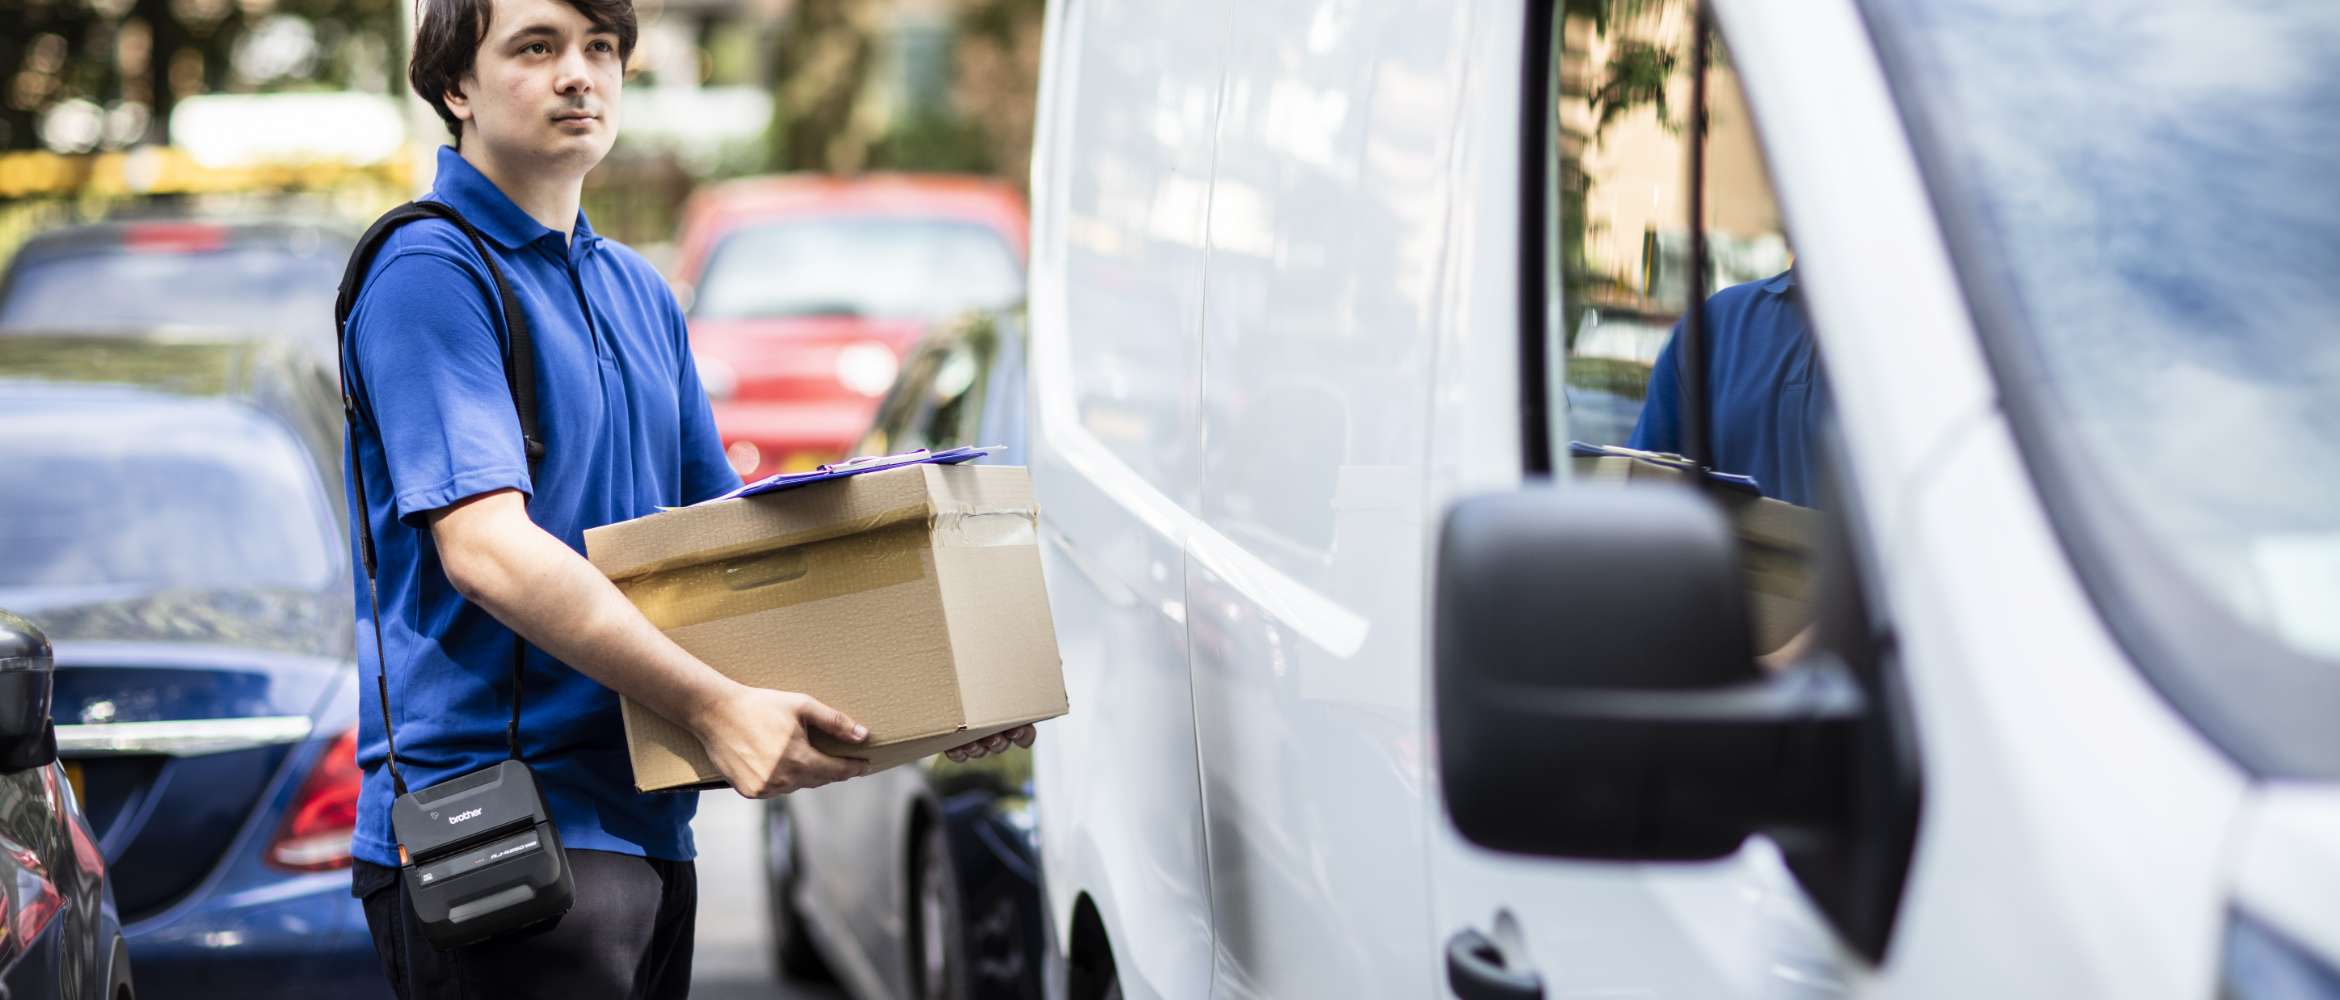 A delivery driver in the transport and logistics industry is delivering a package to a residence.